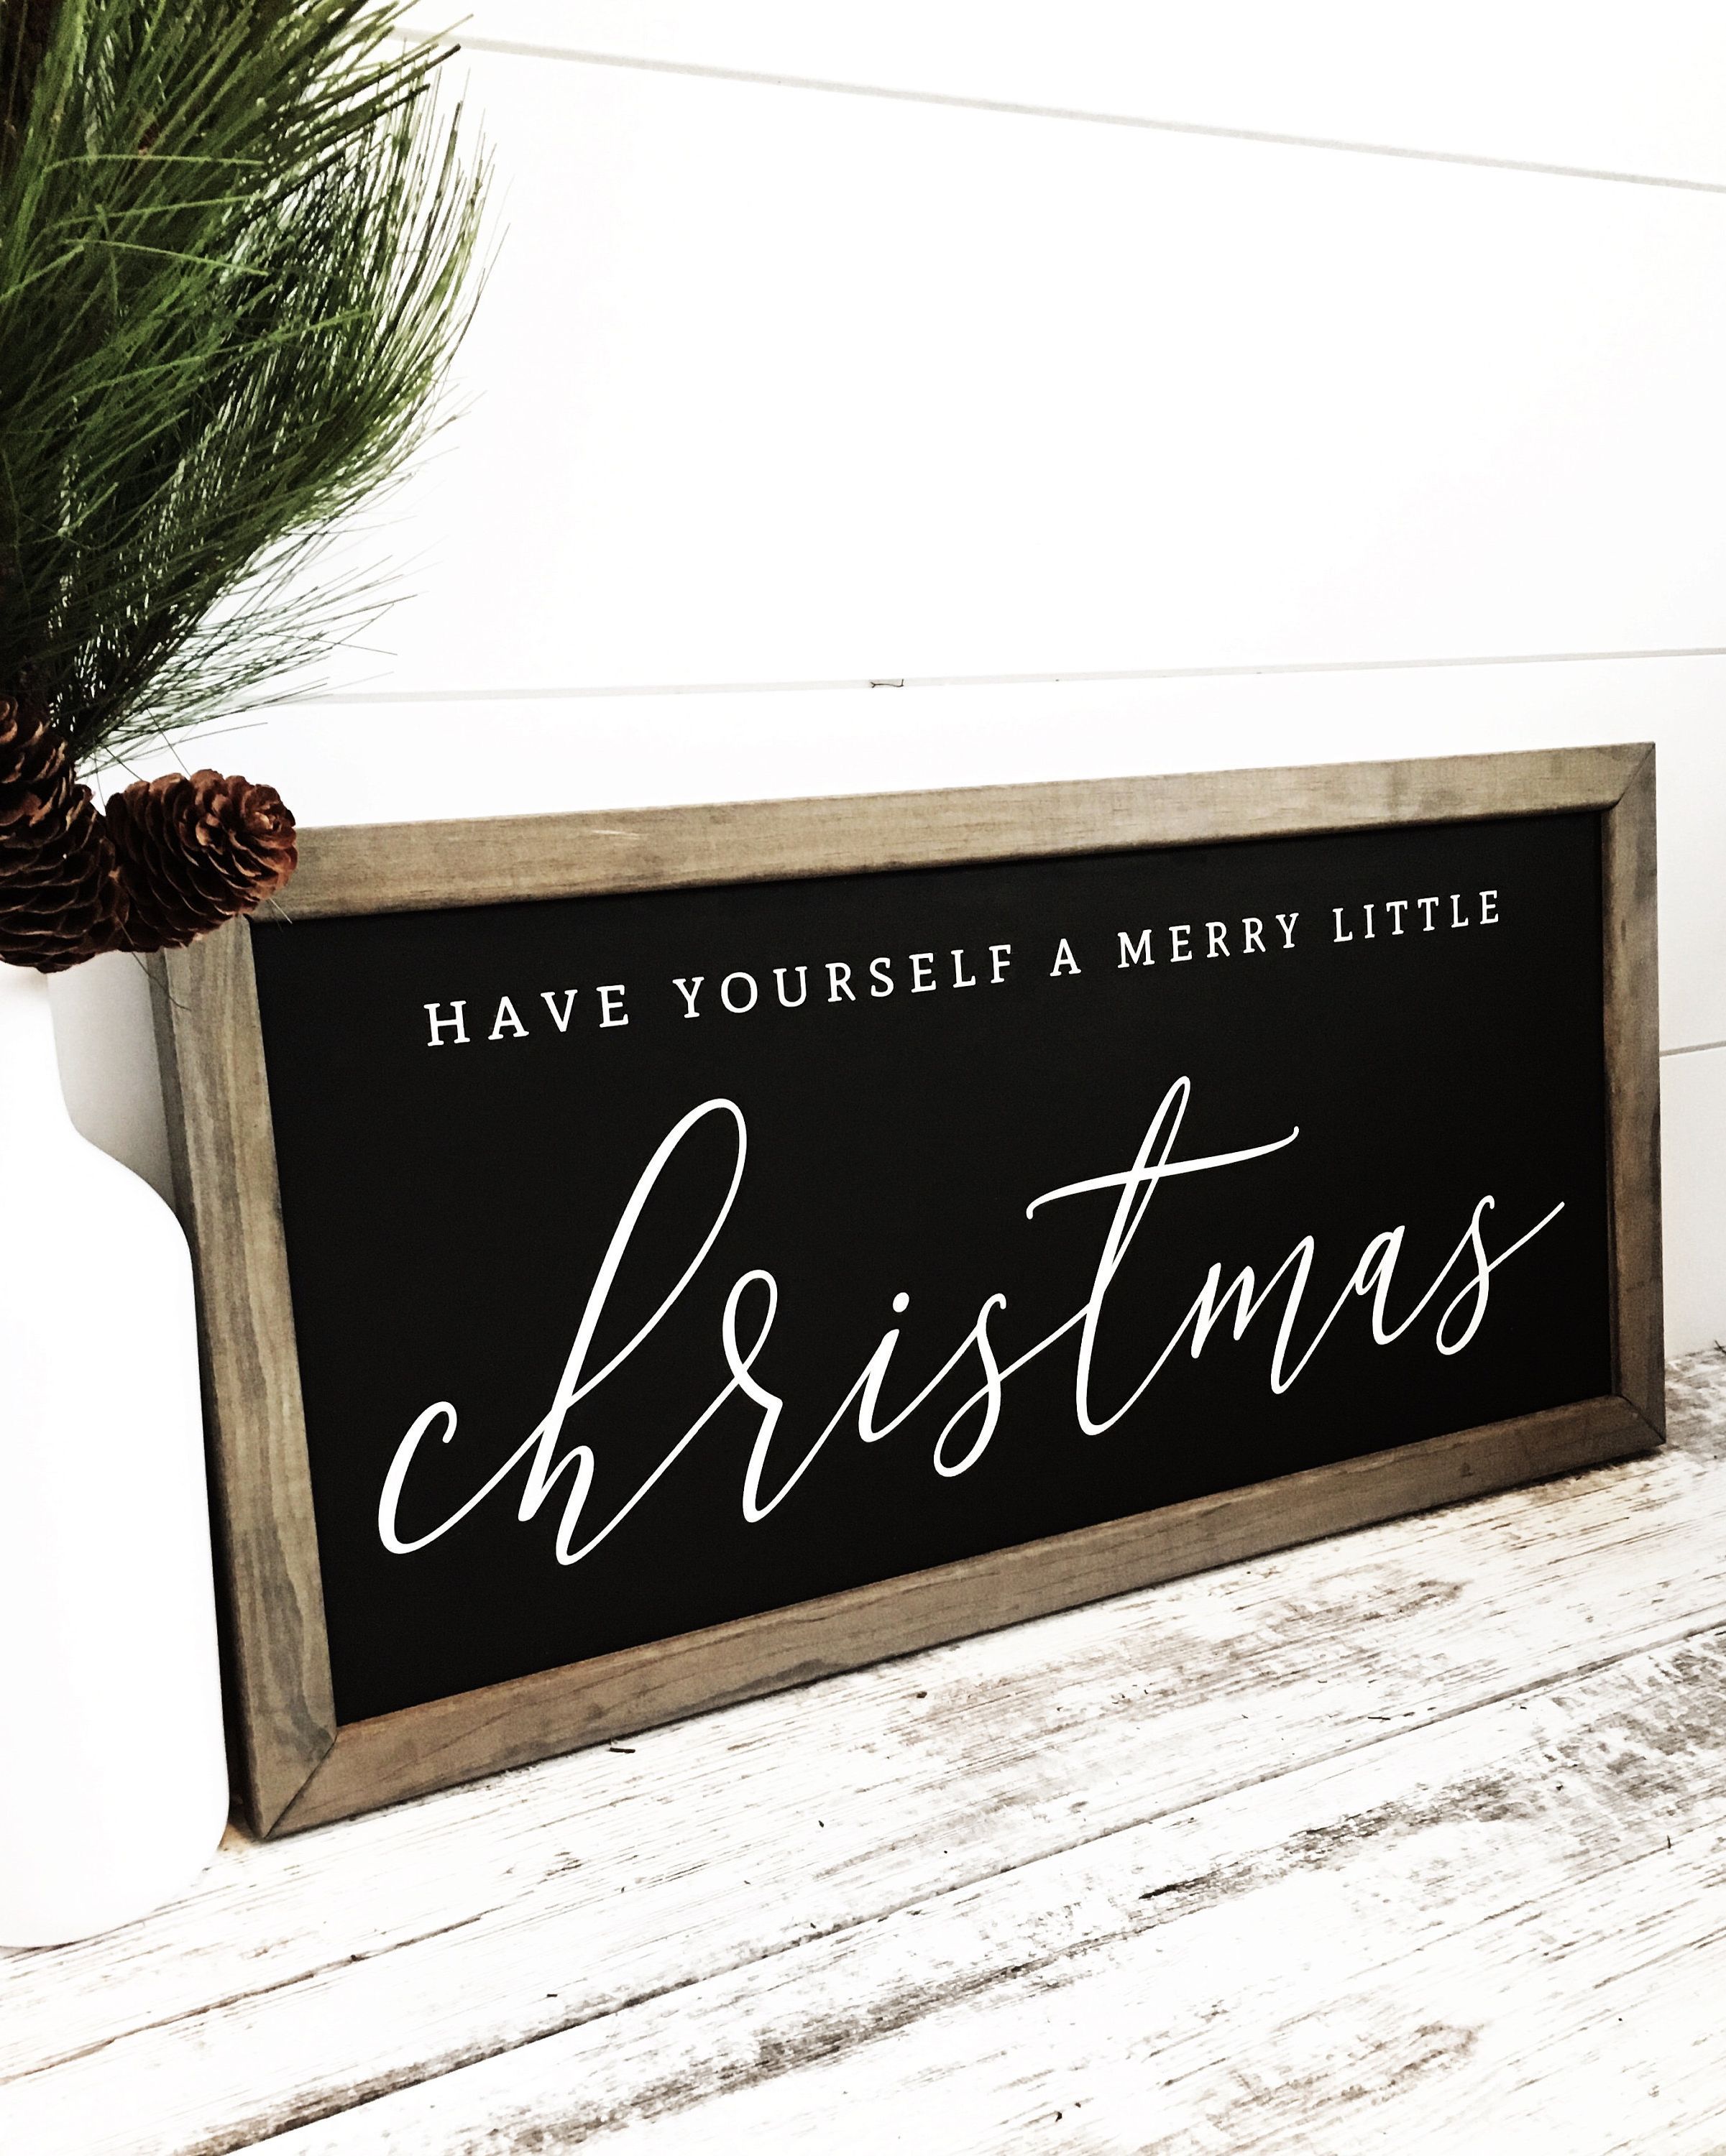 Have Yourself a Merry Little Christmas, Merry Christmas Sign, Wood Christmas Signs, Farmhouse Holiday Wall Decor -   22 holiday Pictures wall ideas